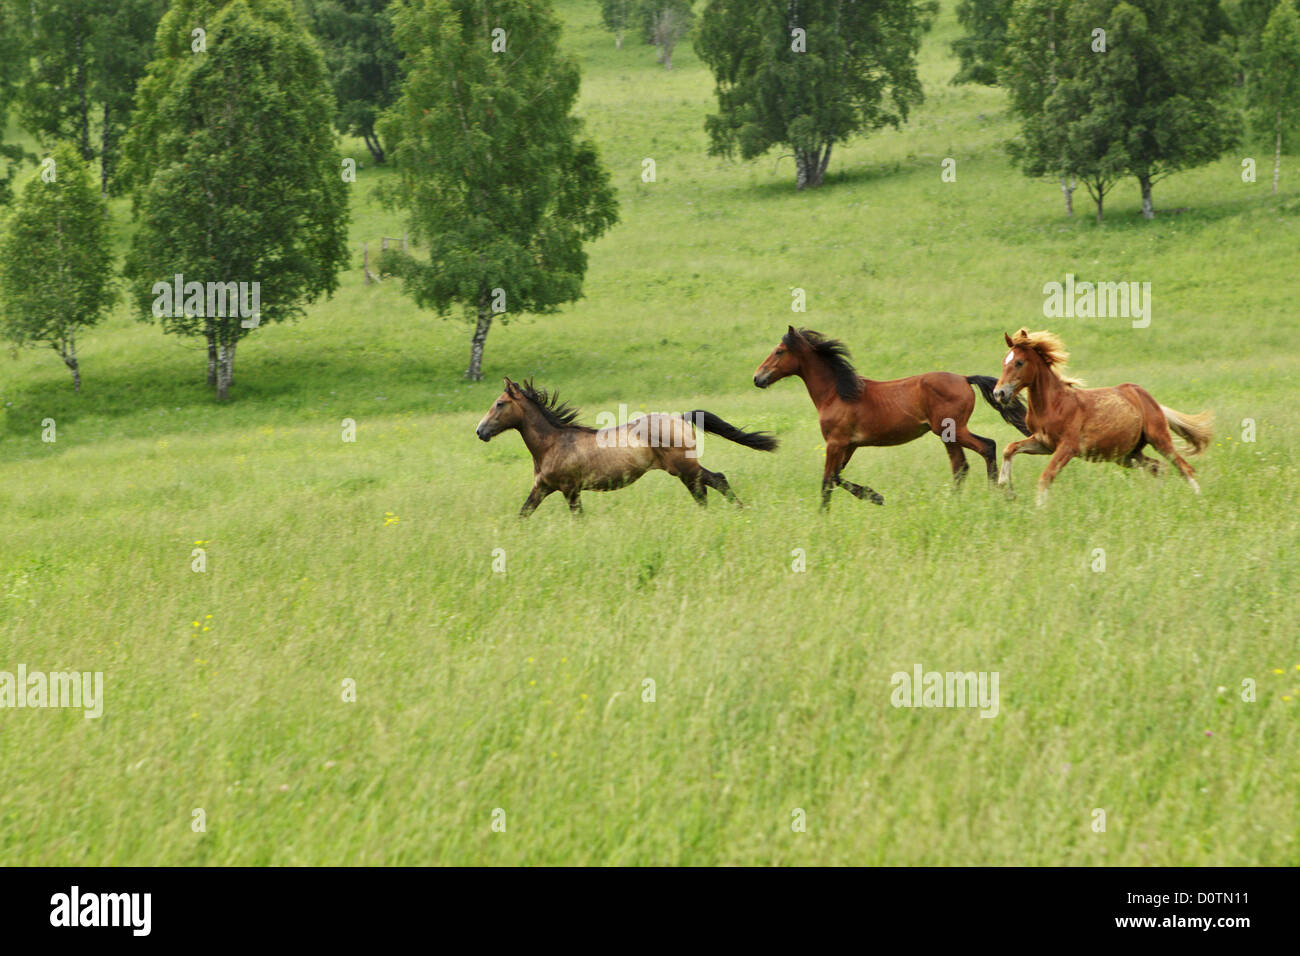 The Altay's meadow running horses on it Stock Photo